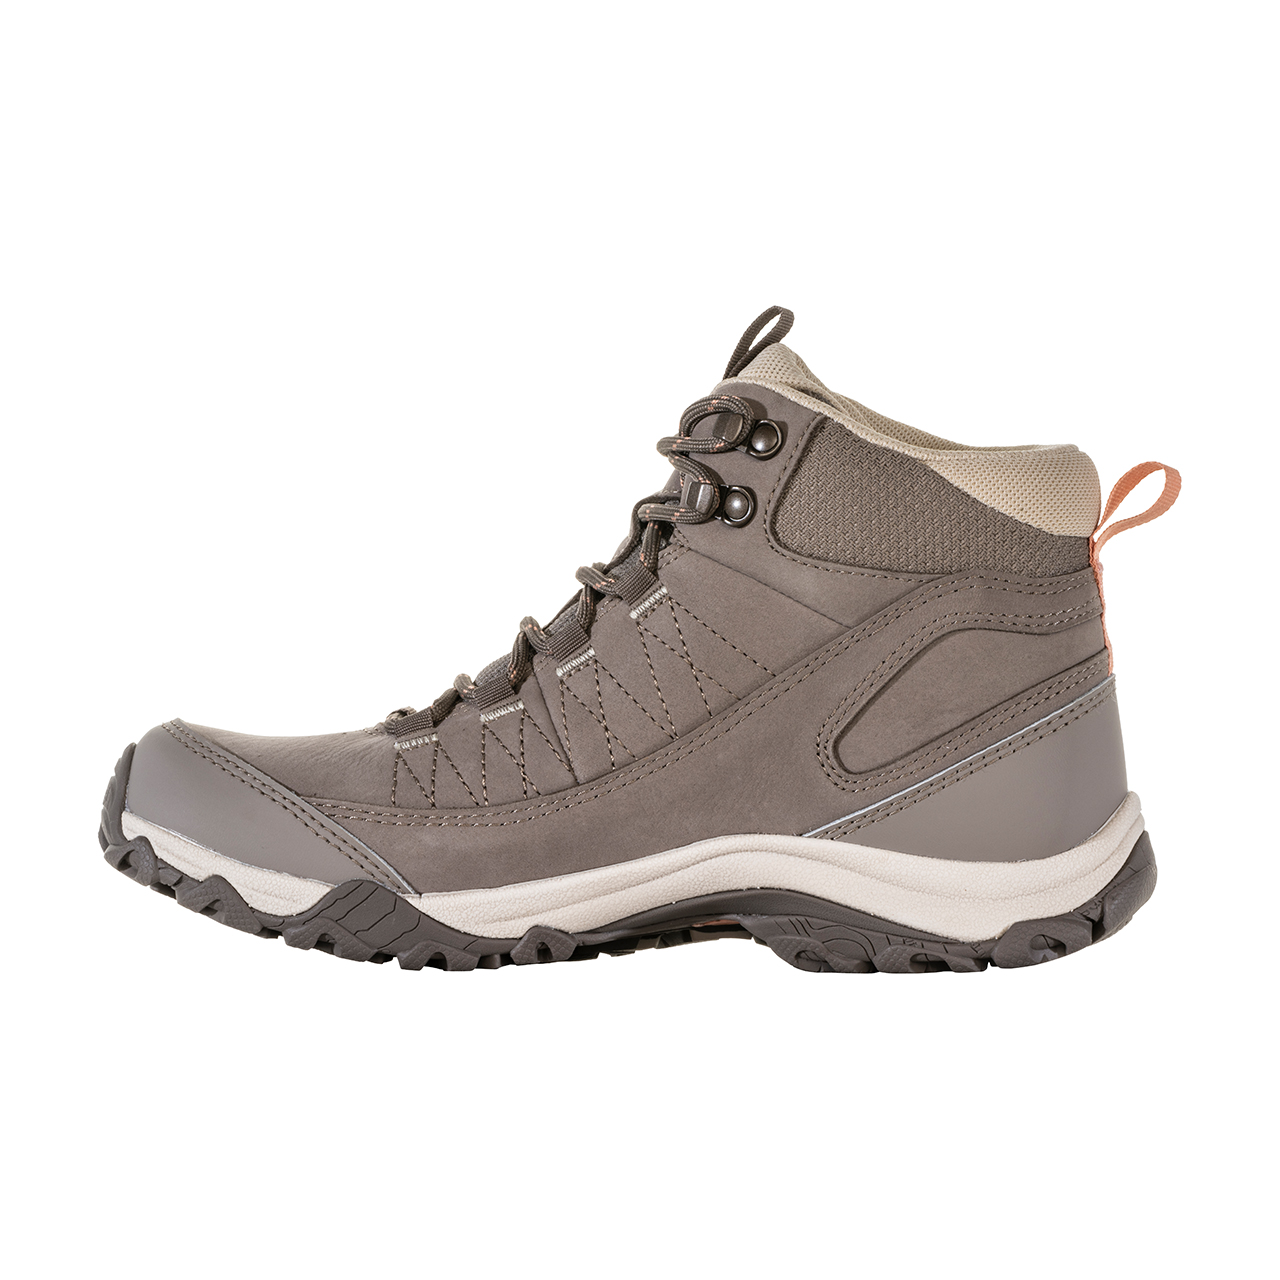 Women’s Oboz Ousel Mid B Dry Walking Boots